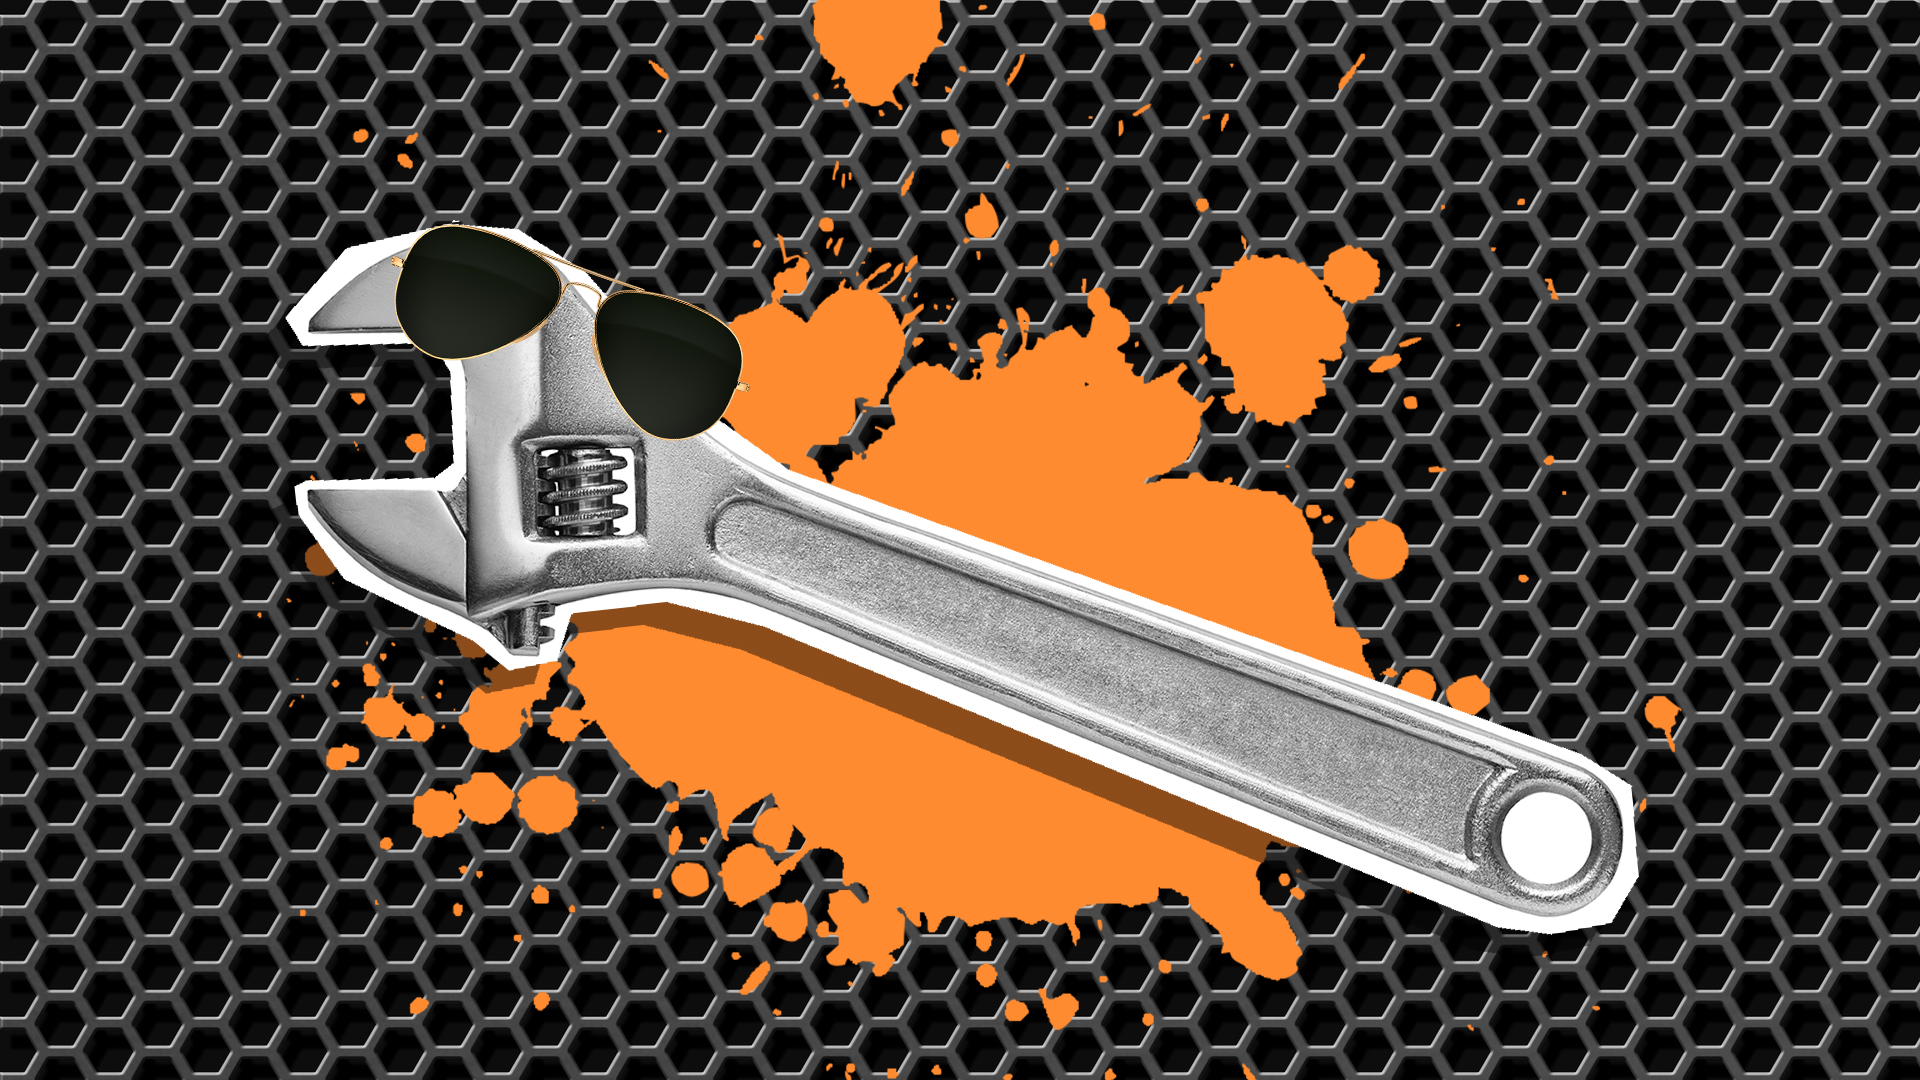 A wrench on a metal patterned background